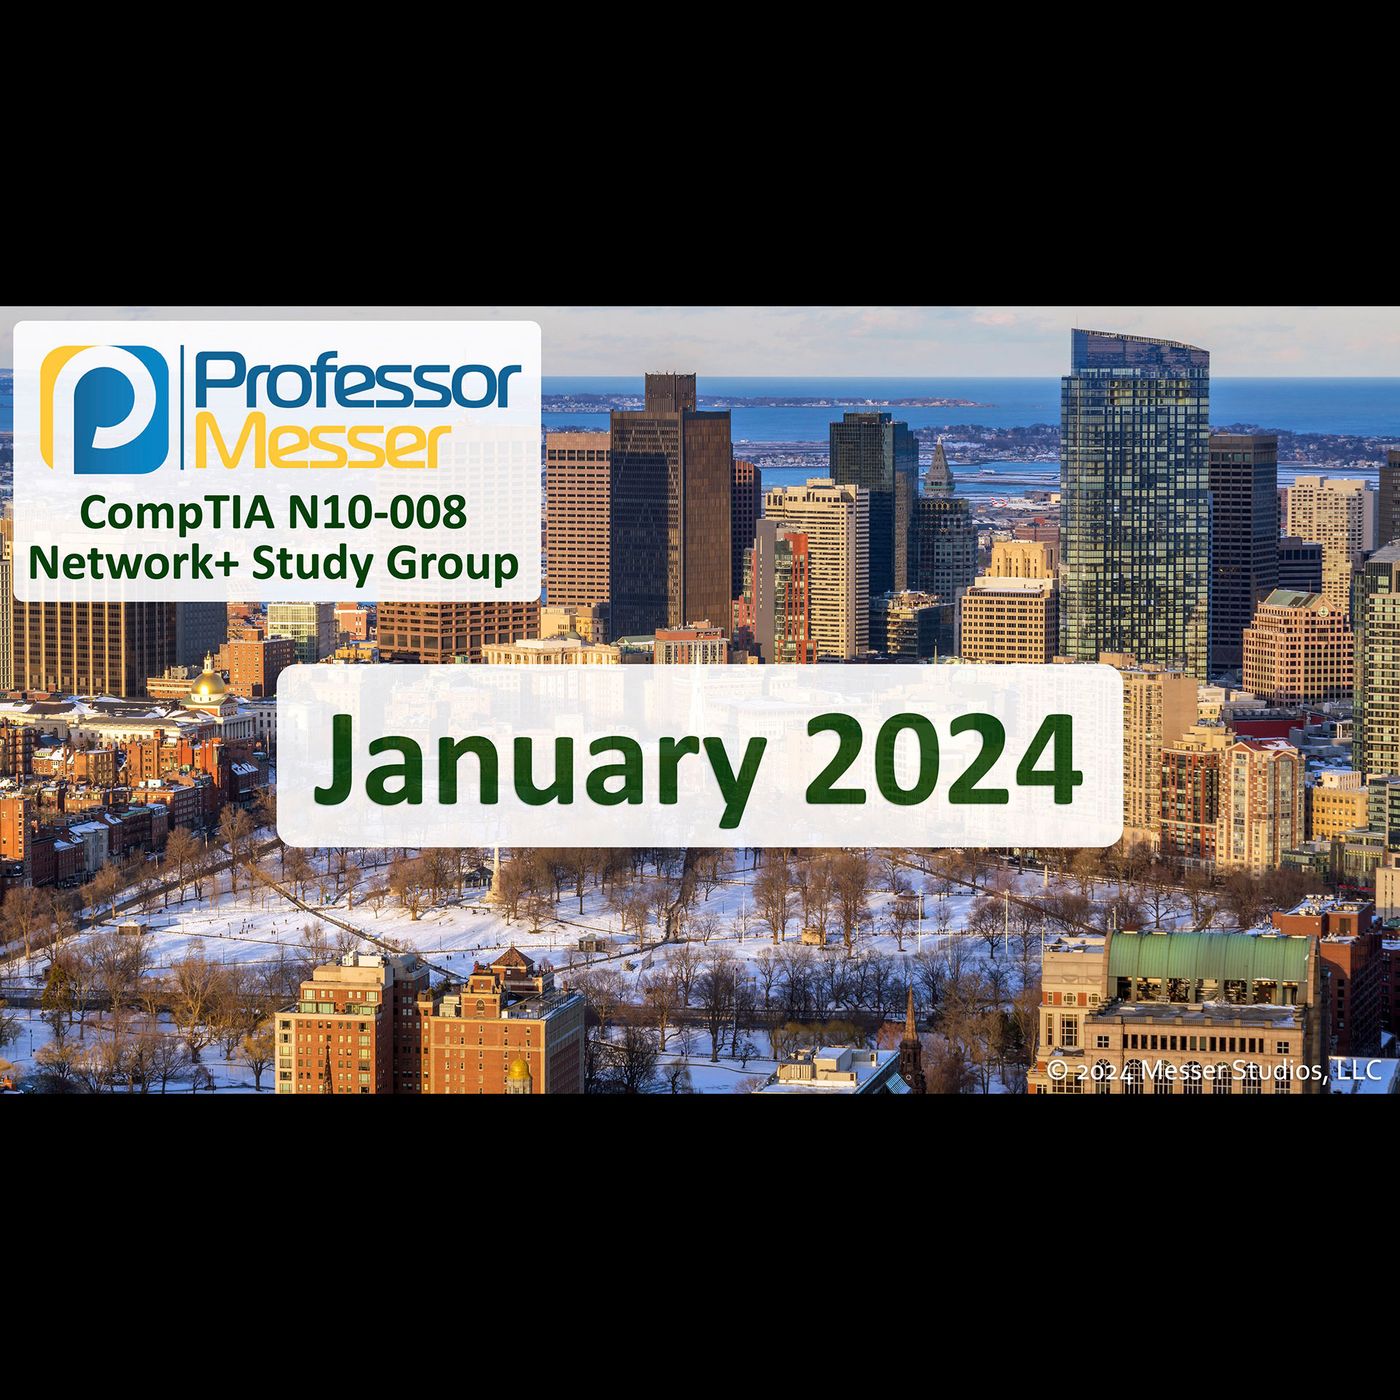 Professor Messer’s N10-008 Network+ Study Group After Show - January 2024